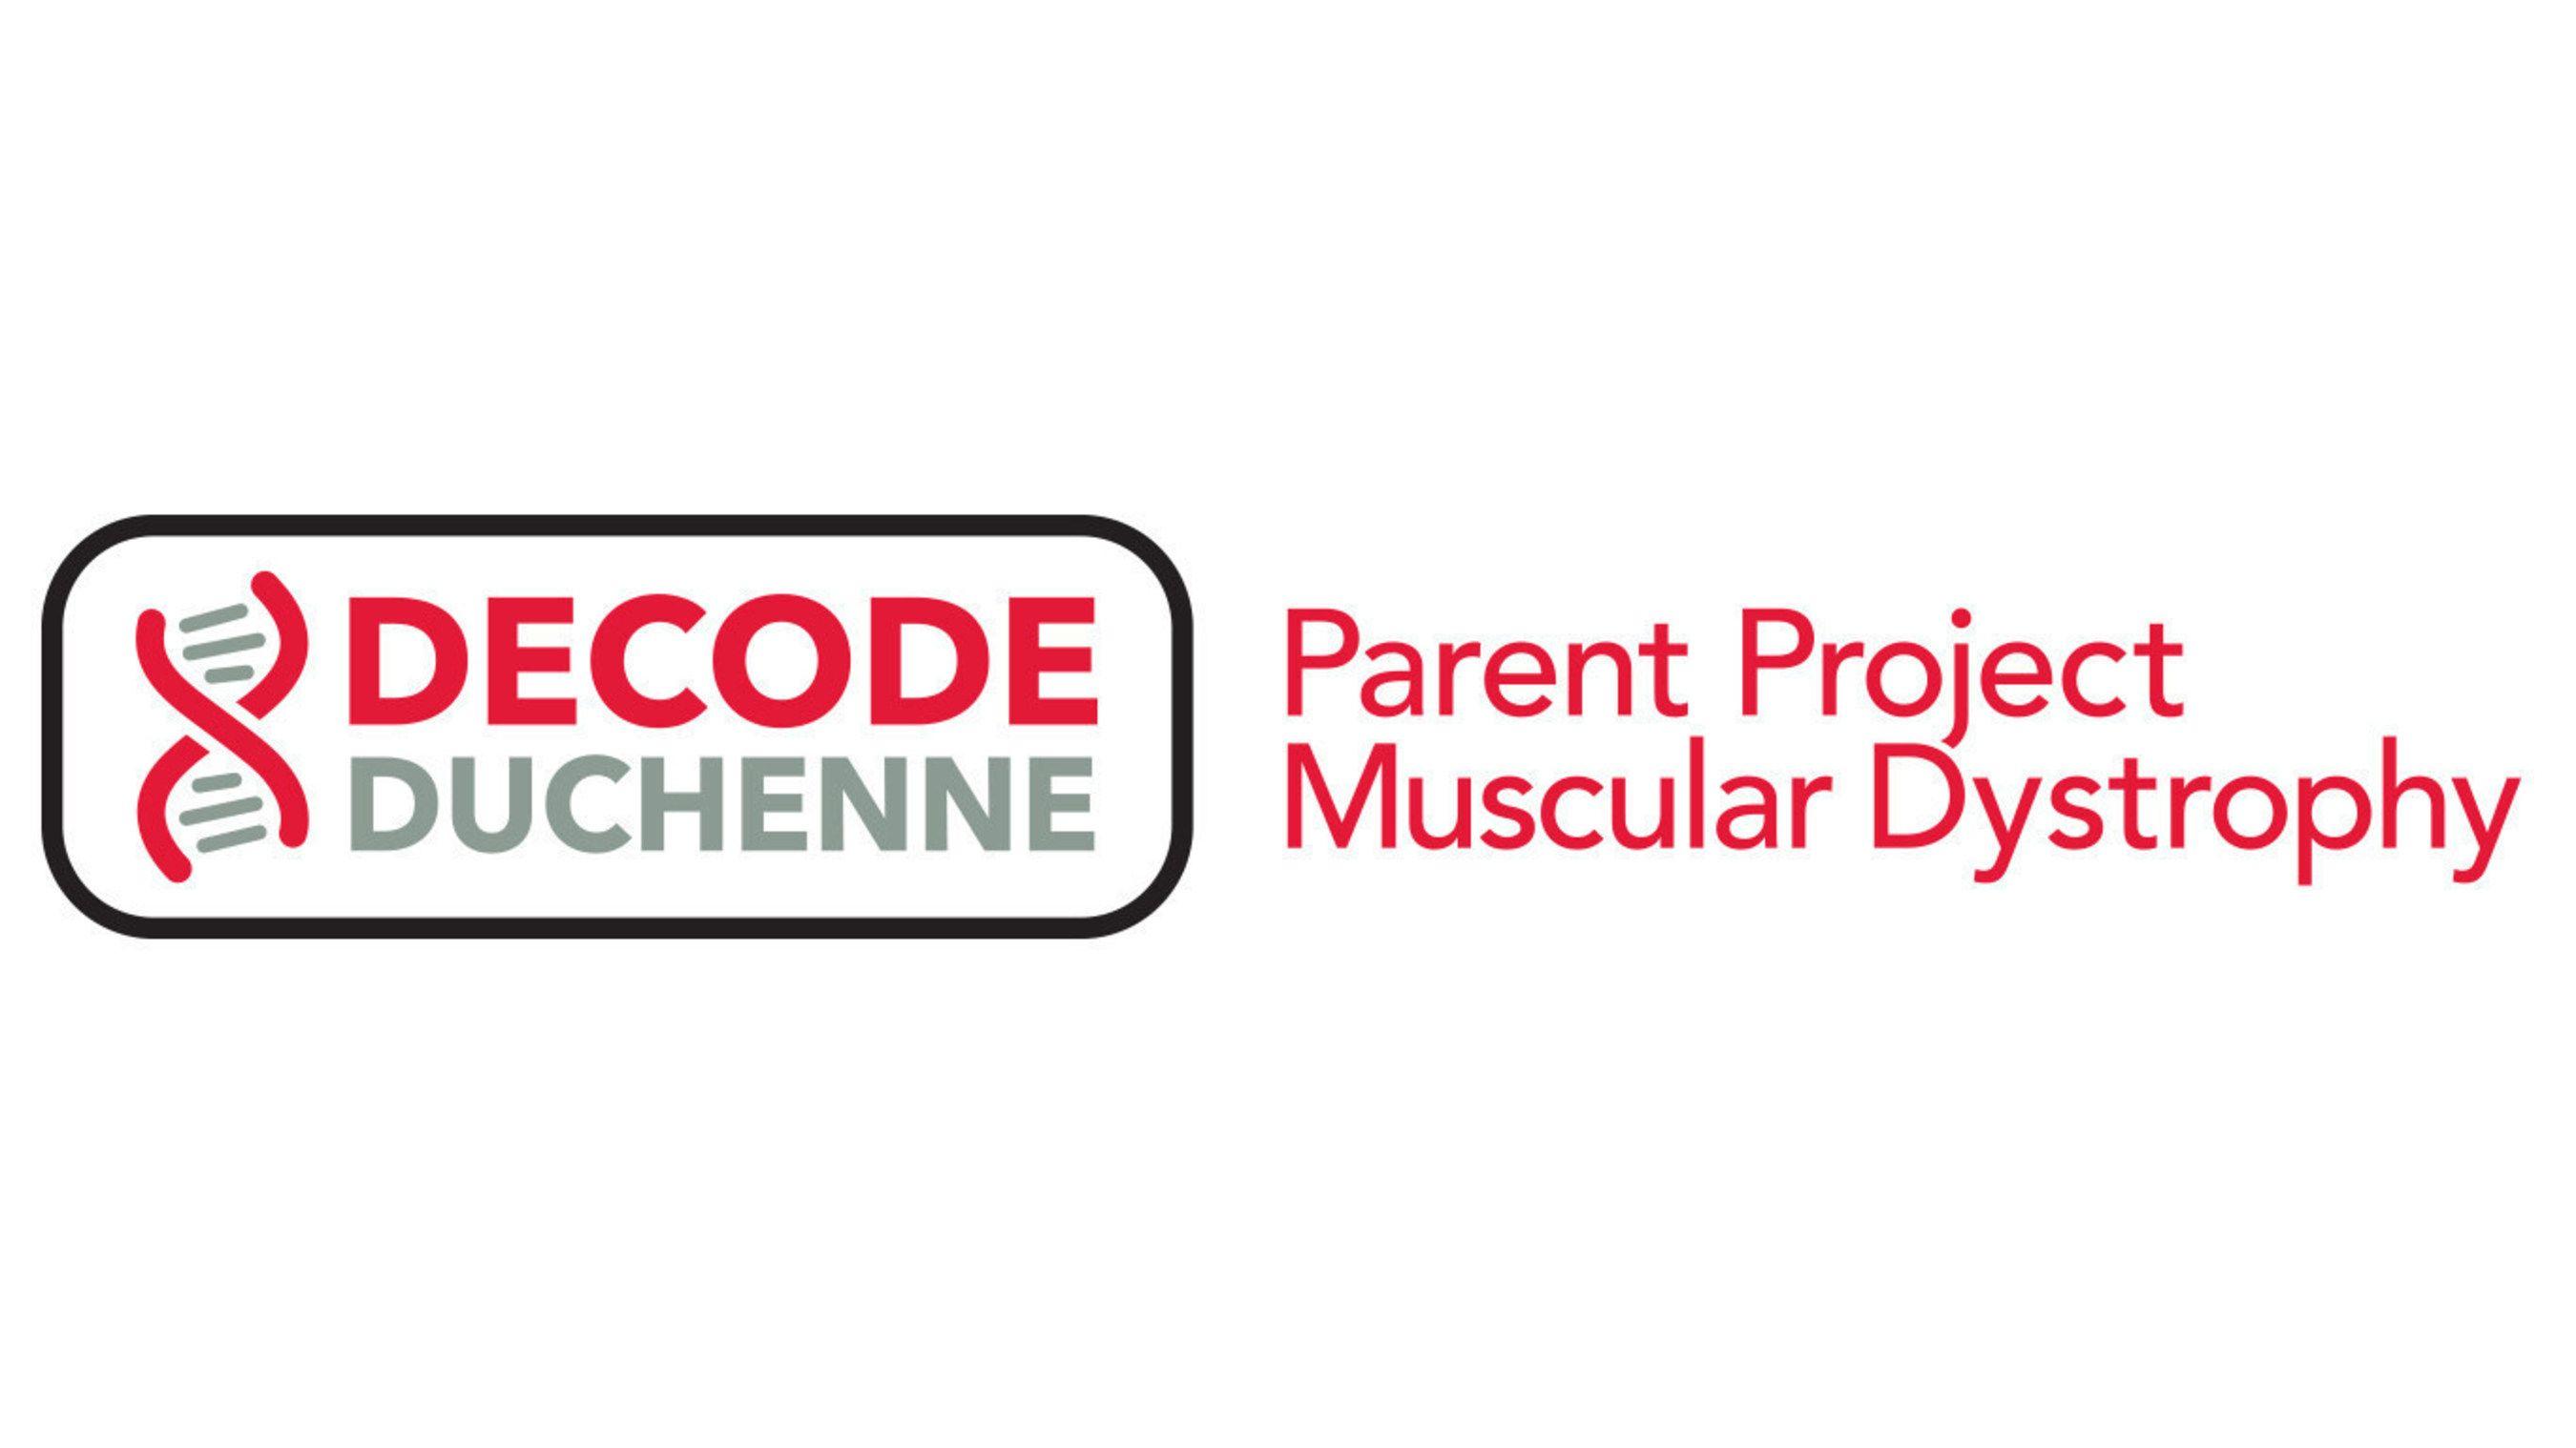 BioMarin Logo - Parent Project Muscular Dystrophy Launches Next Phase of Genetic